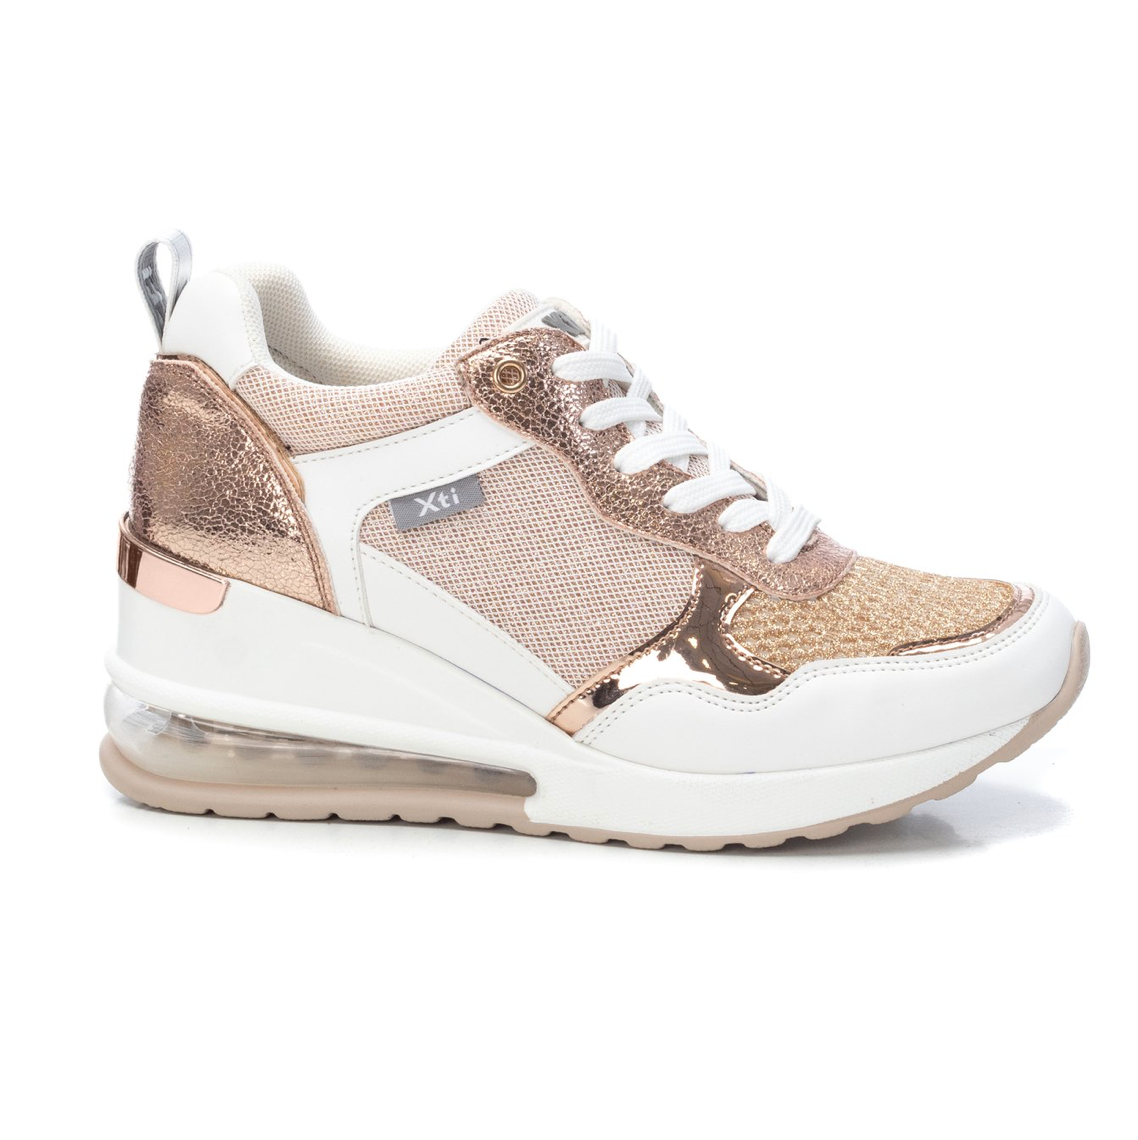 XTI - 42631 - Women's Wedged Trainer - White / Nude